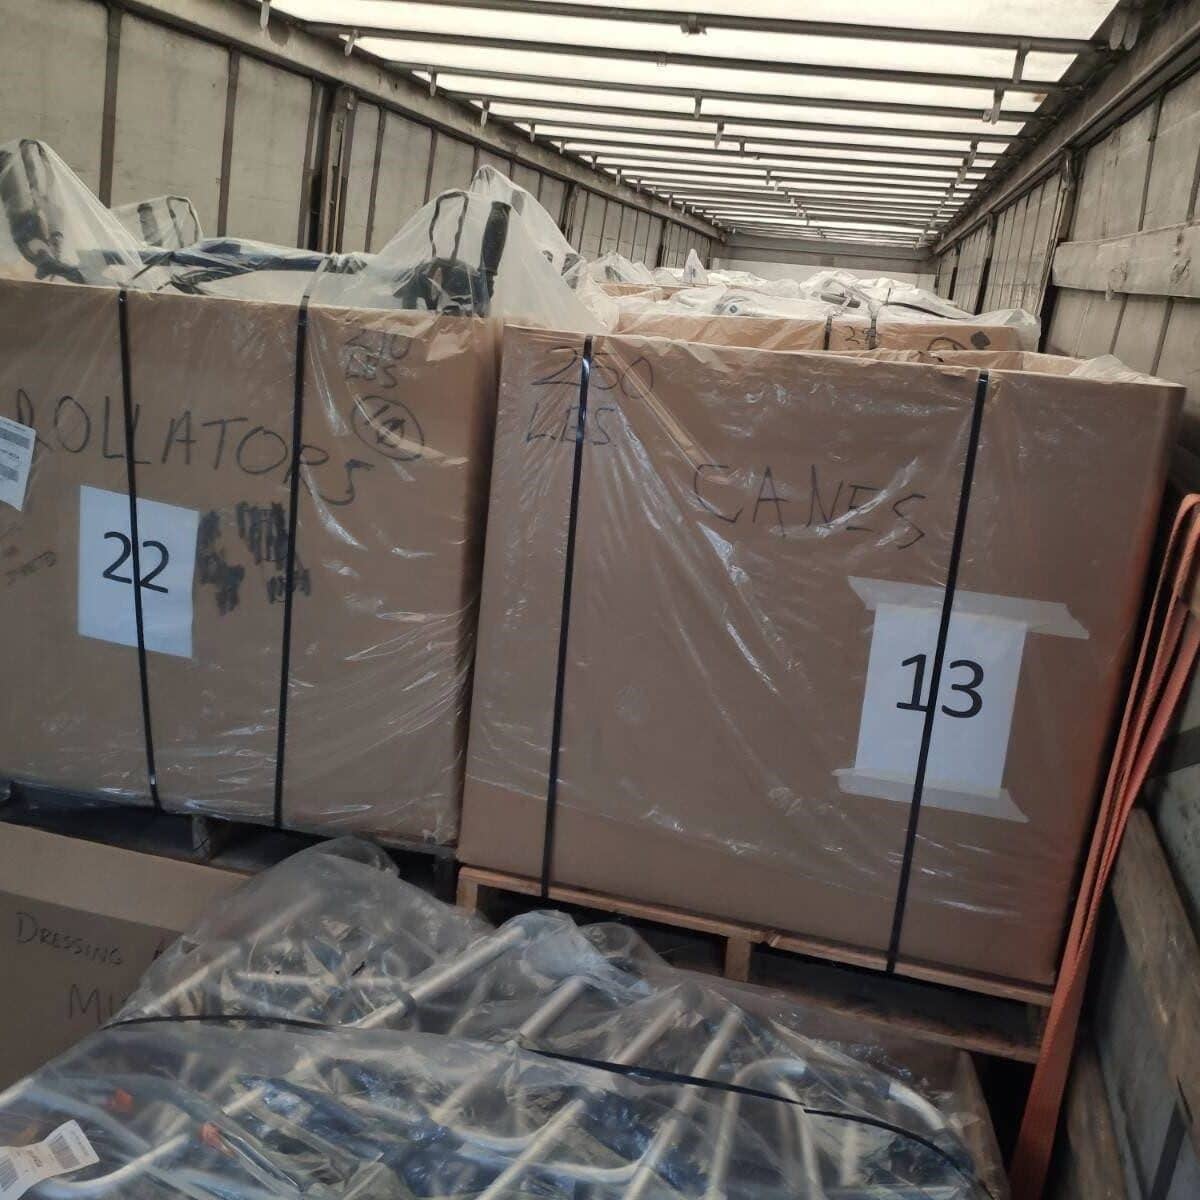 Large cardboard boxes packed in the back of a semi-trailer truck on their way to Ukraine